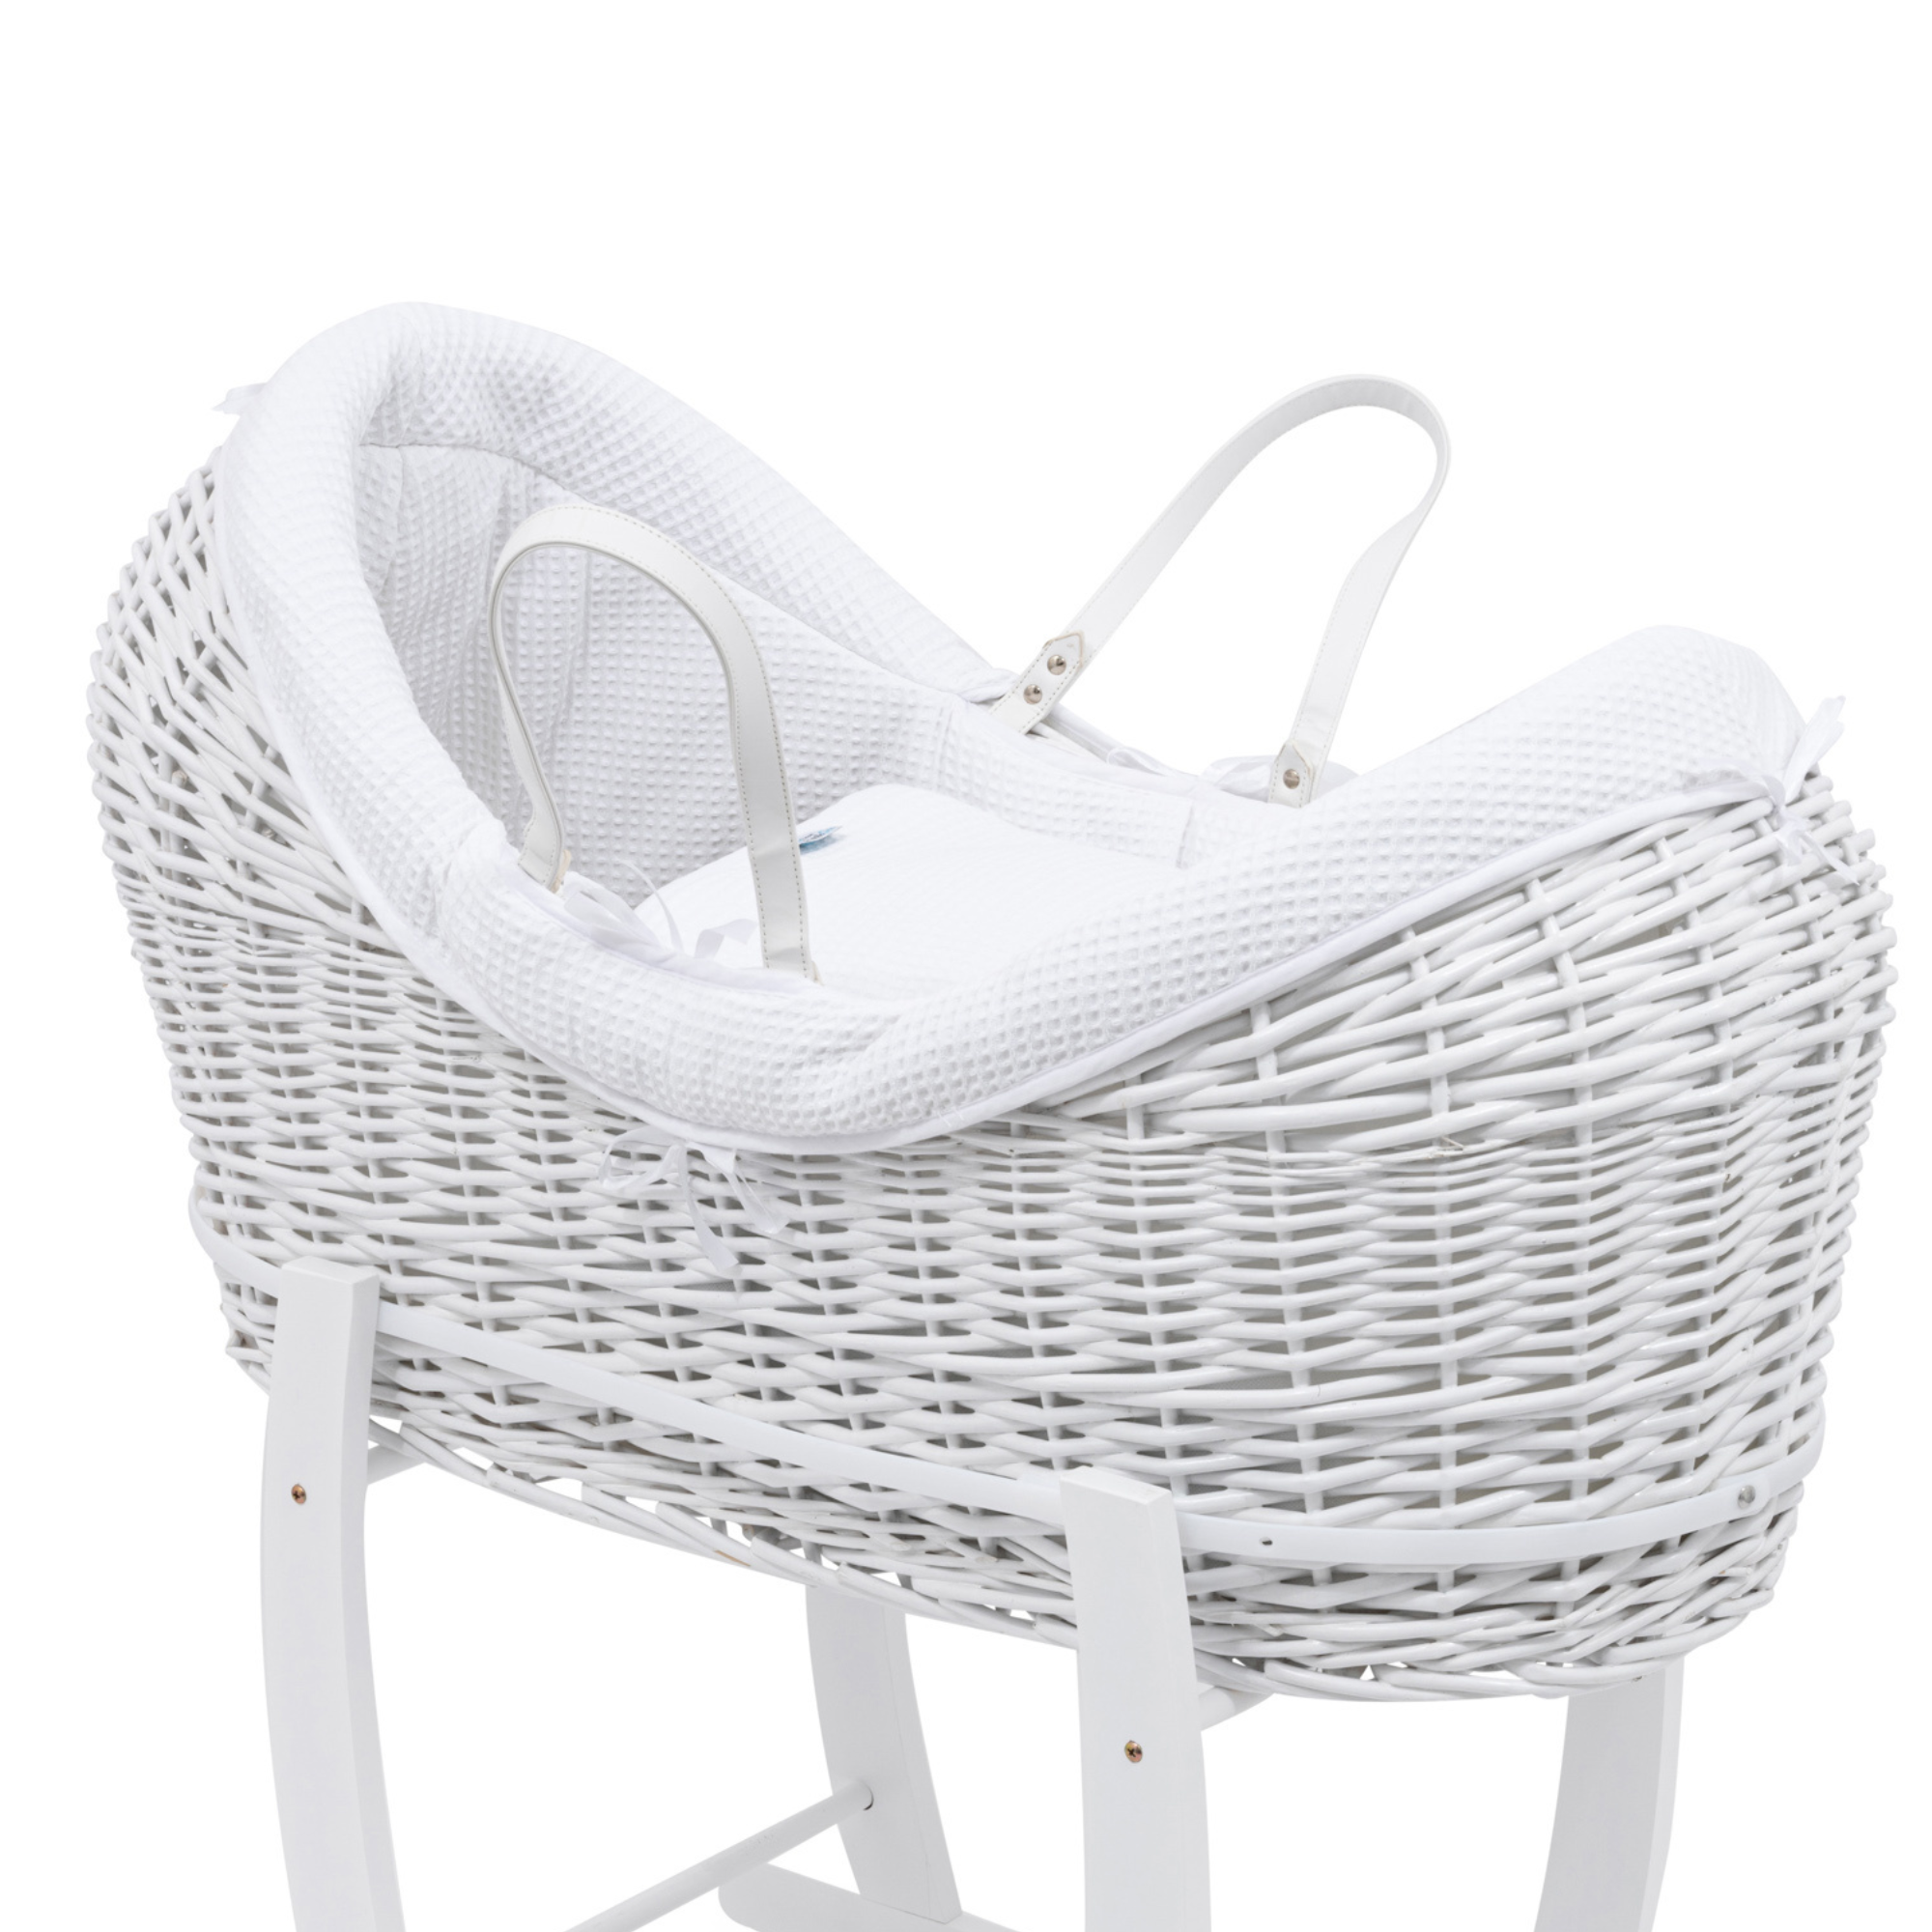 Pod White Waffle Moses Basket Bedding Set - For Your Little One